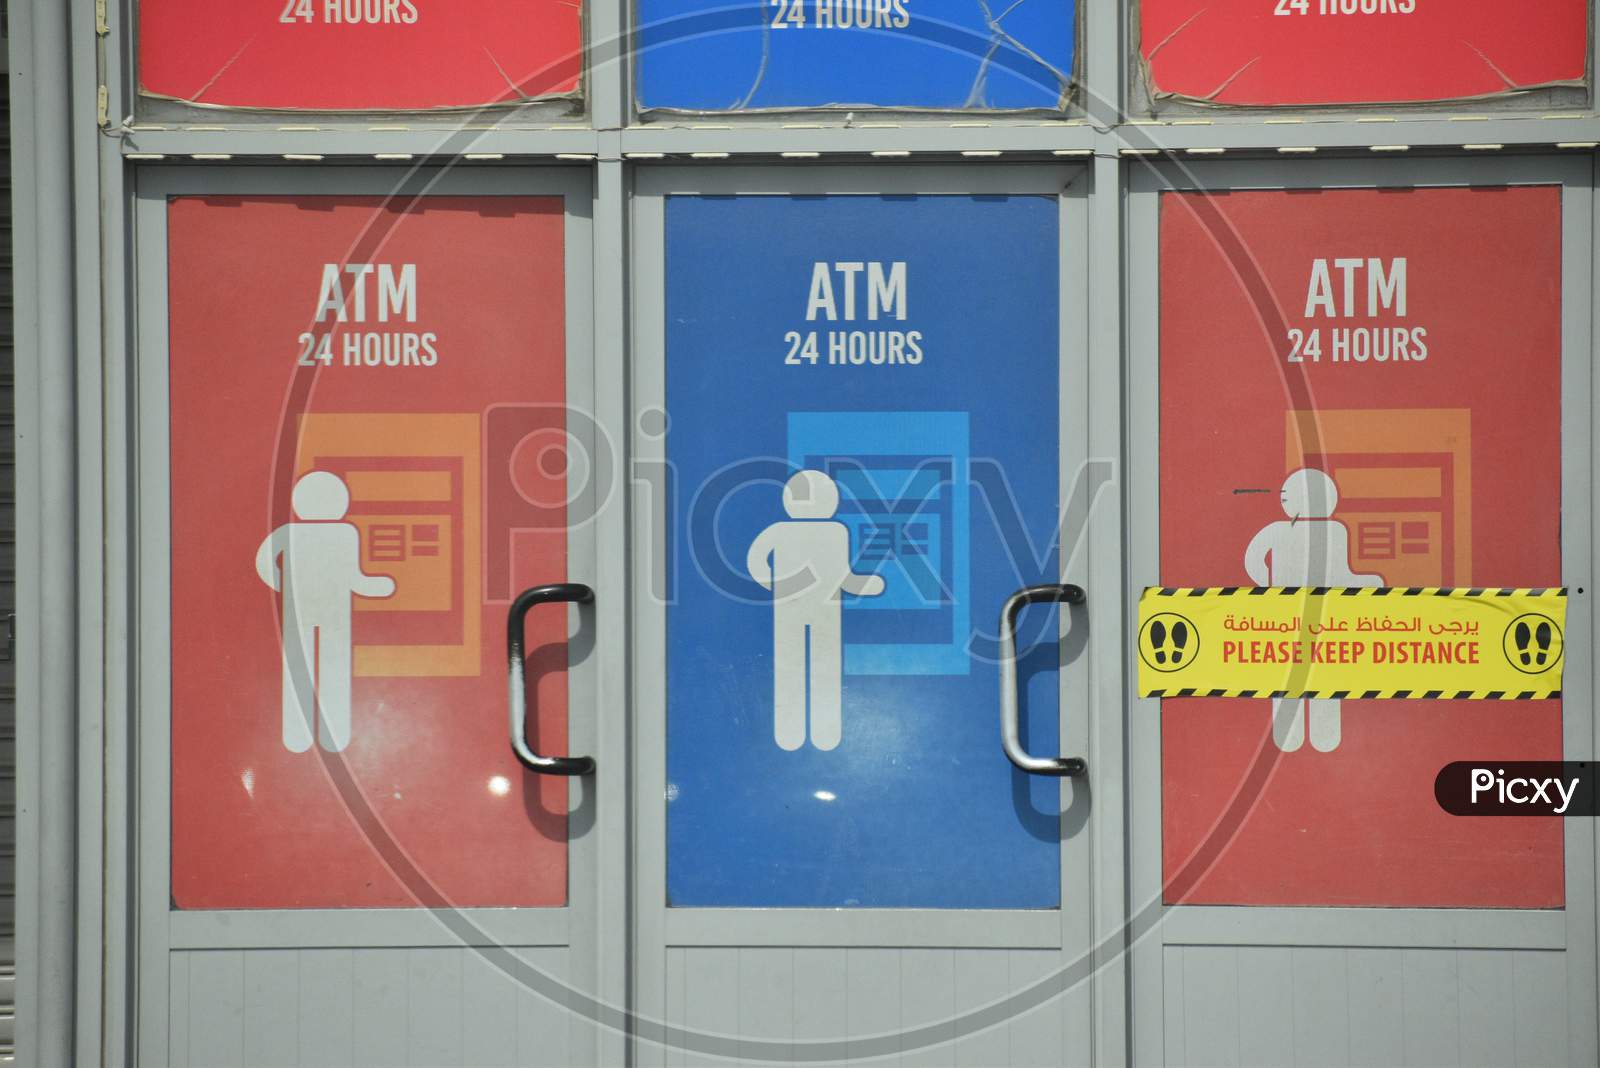 Red And Blue Painted Atm Counter .